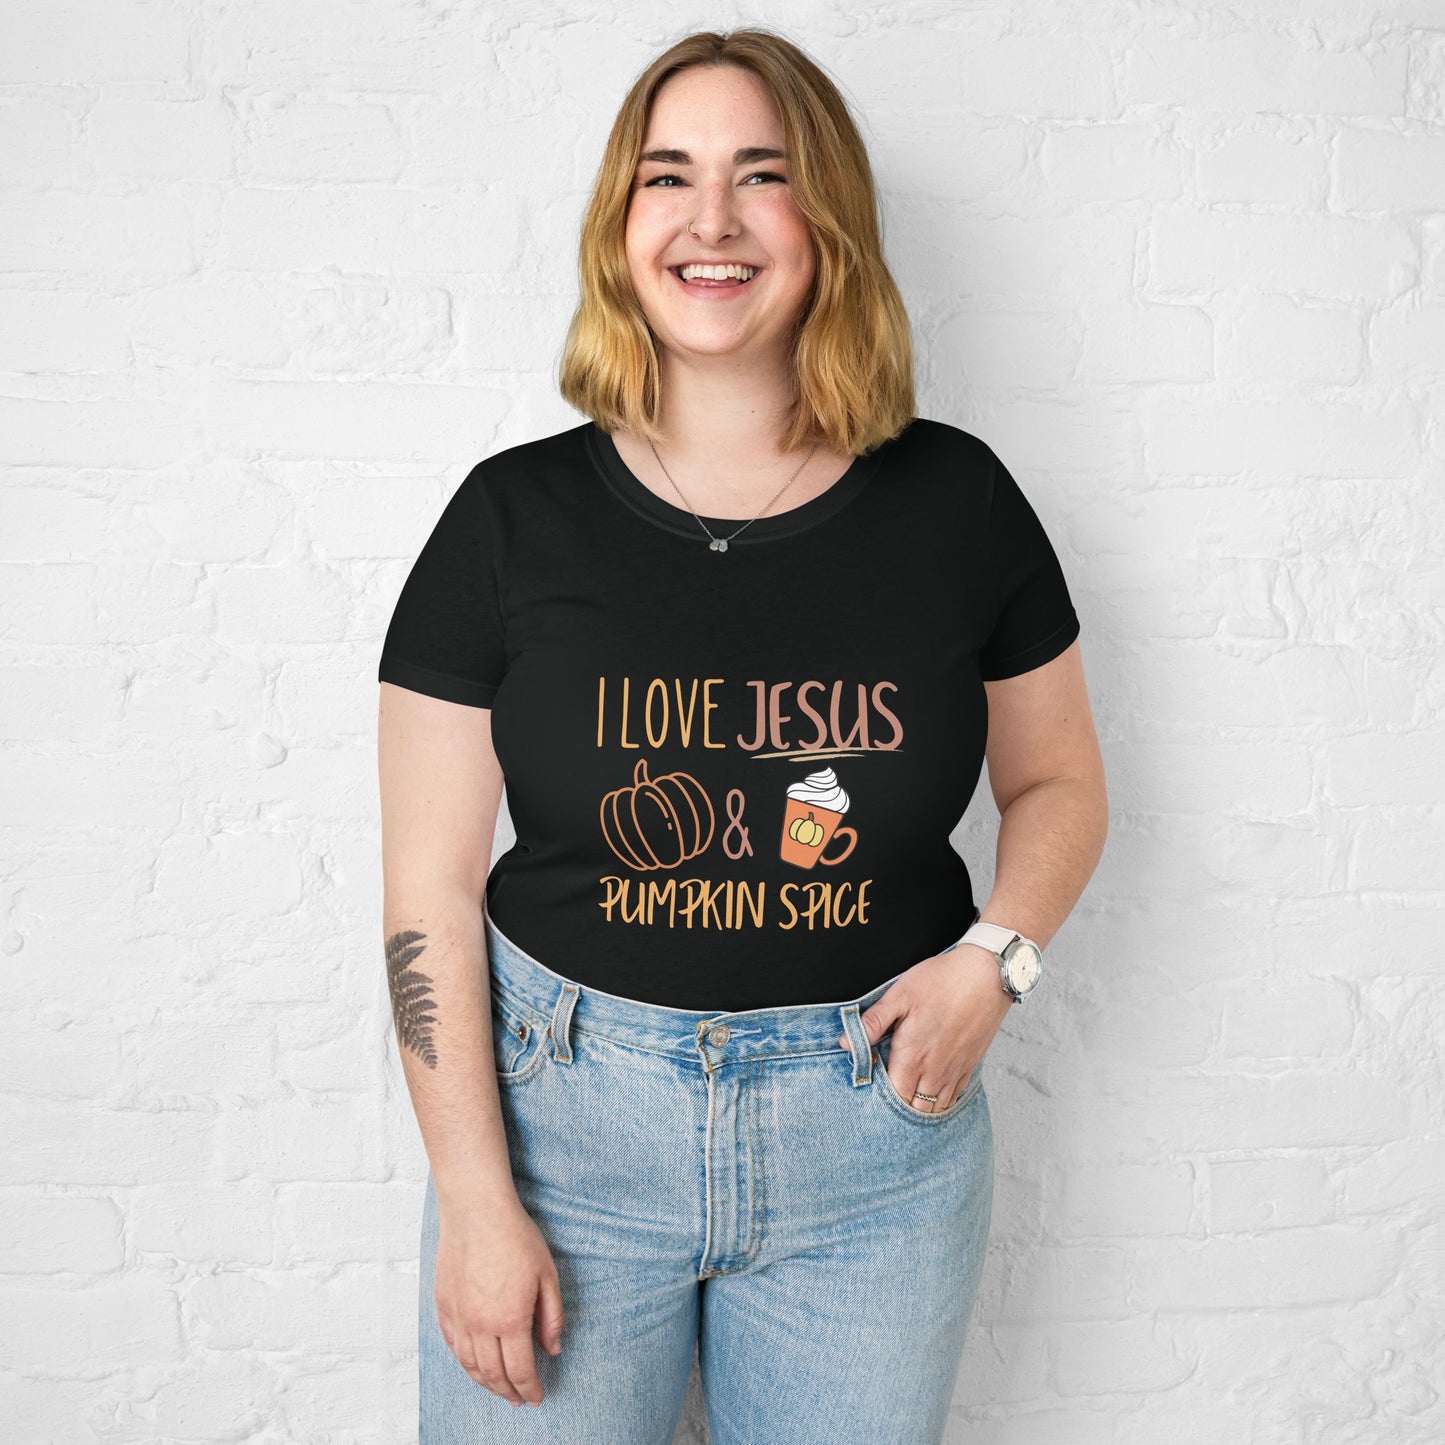 Jesus and Pumpkin Spice - Women’s fitted t-shirt